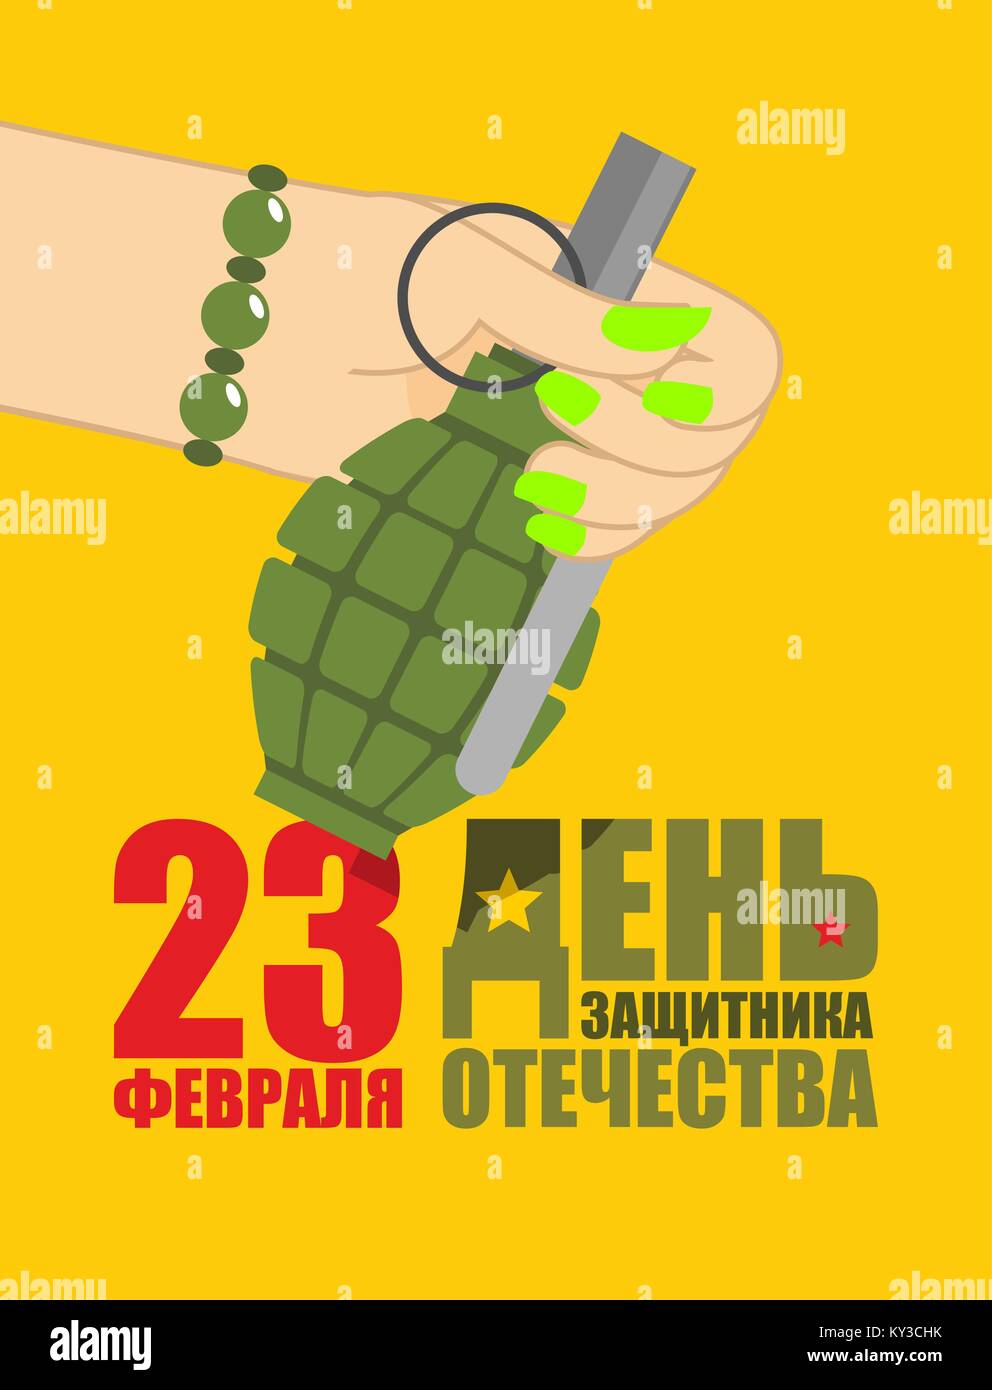 February 23. Woman hand giving Grenade. Traditional gift for men on Day of Defender of Fatherland in Russia. Translation text Russian. February 23. Stock Vector